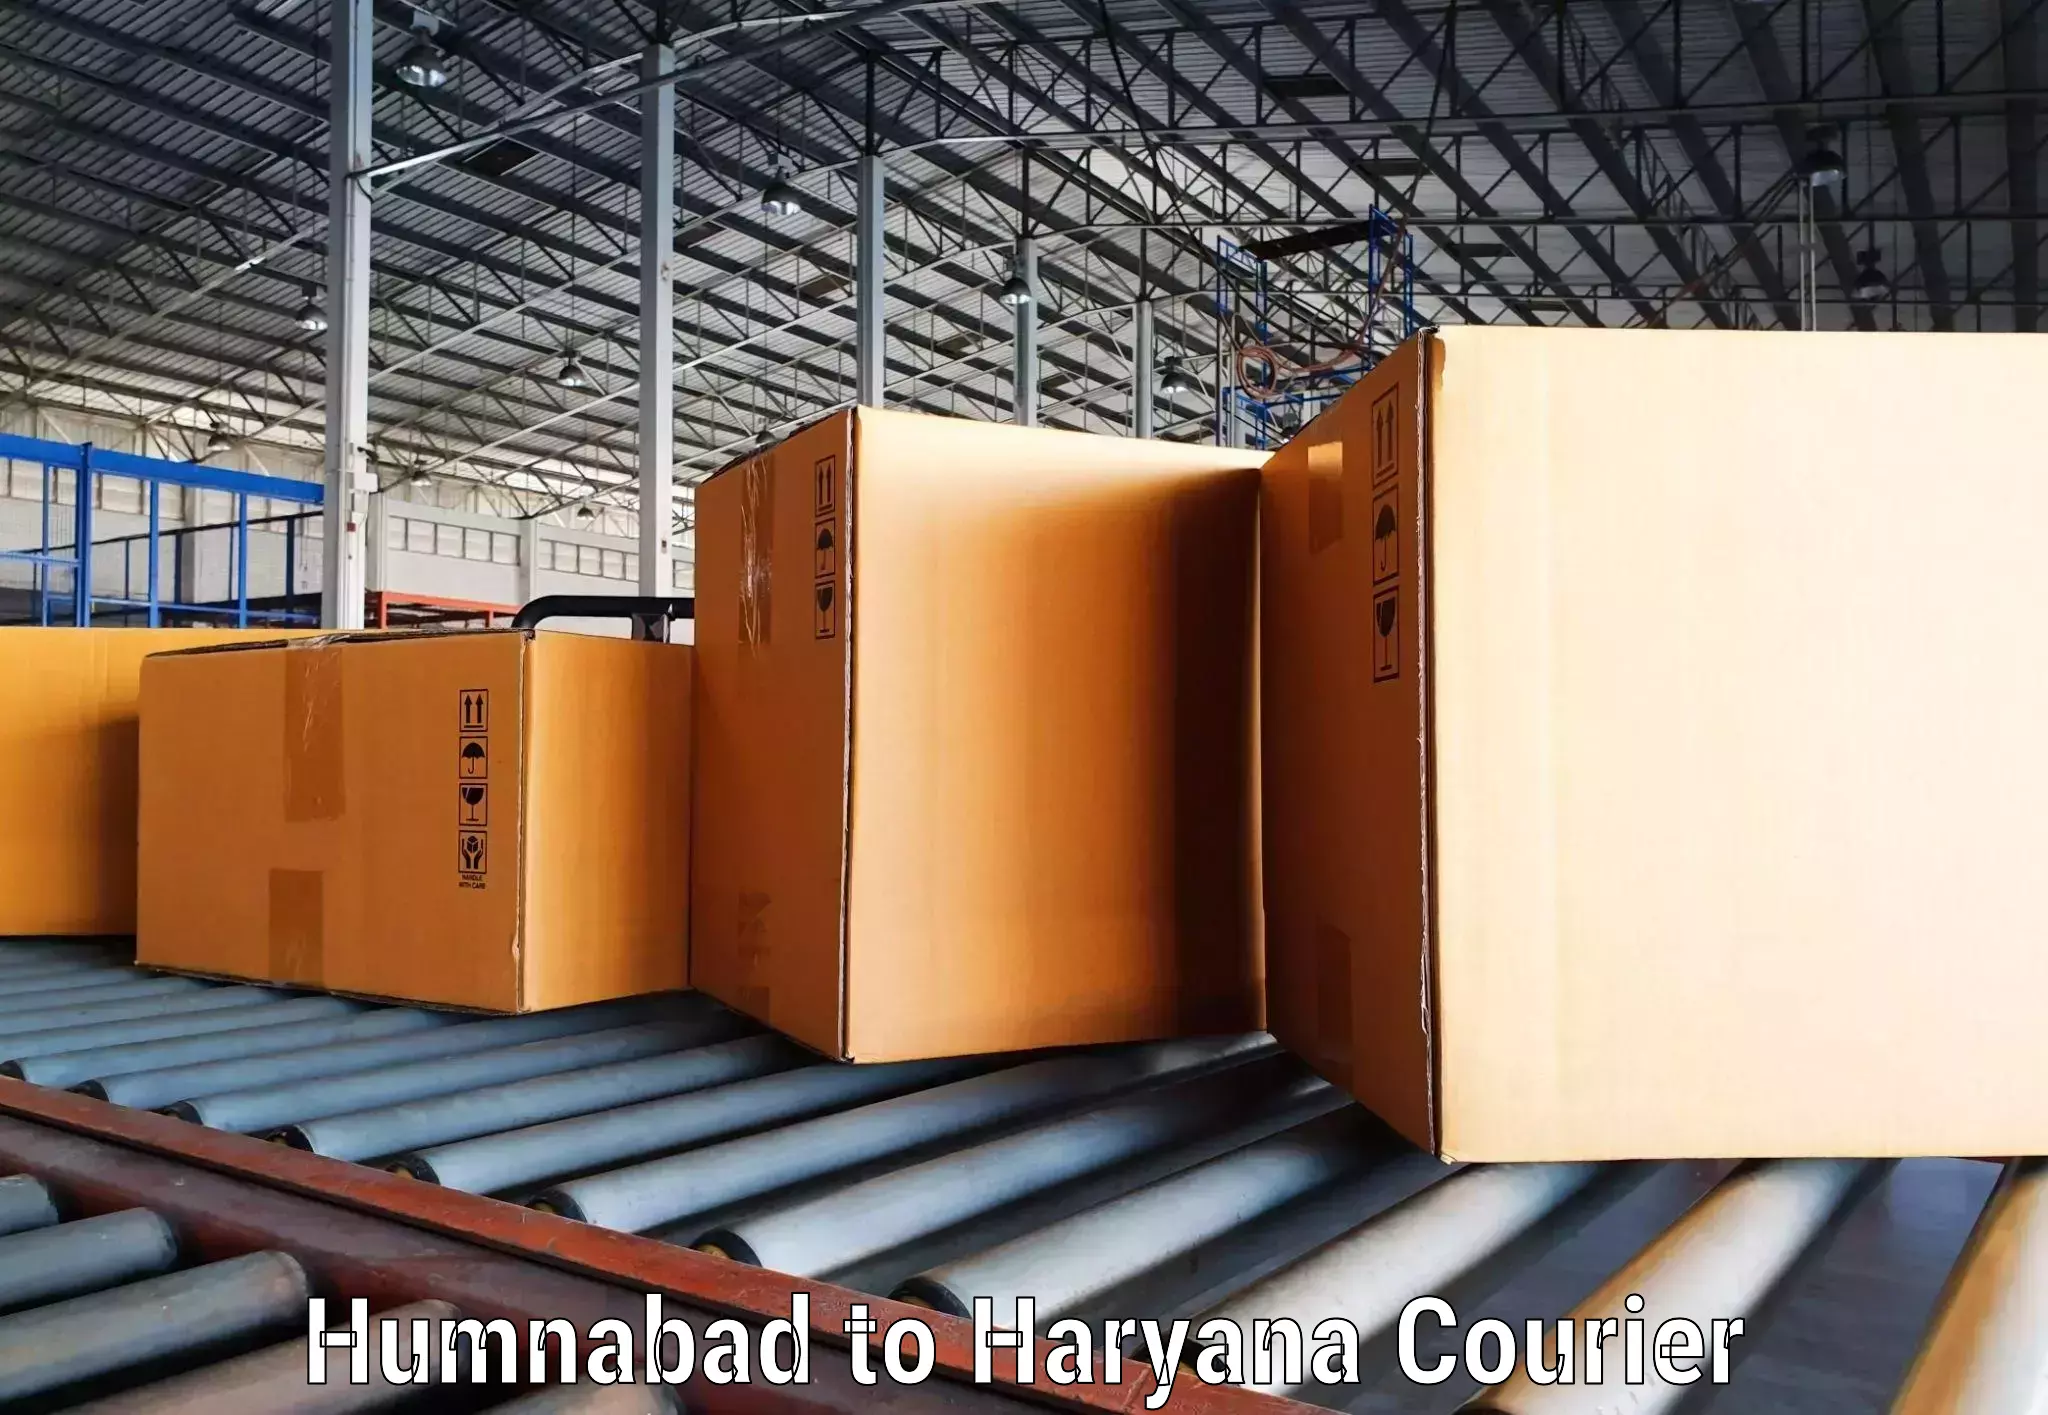 Sustainable courier practices Humnabad to NCR Haryana